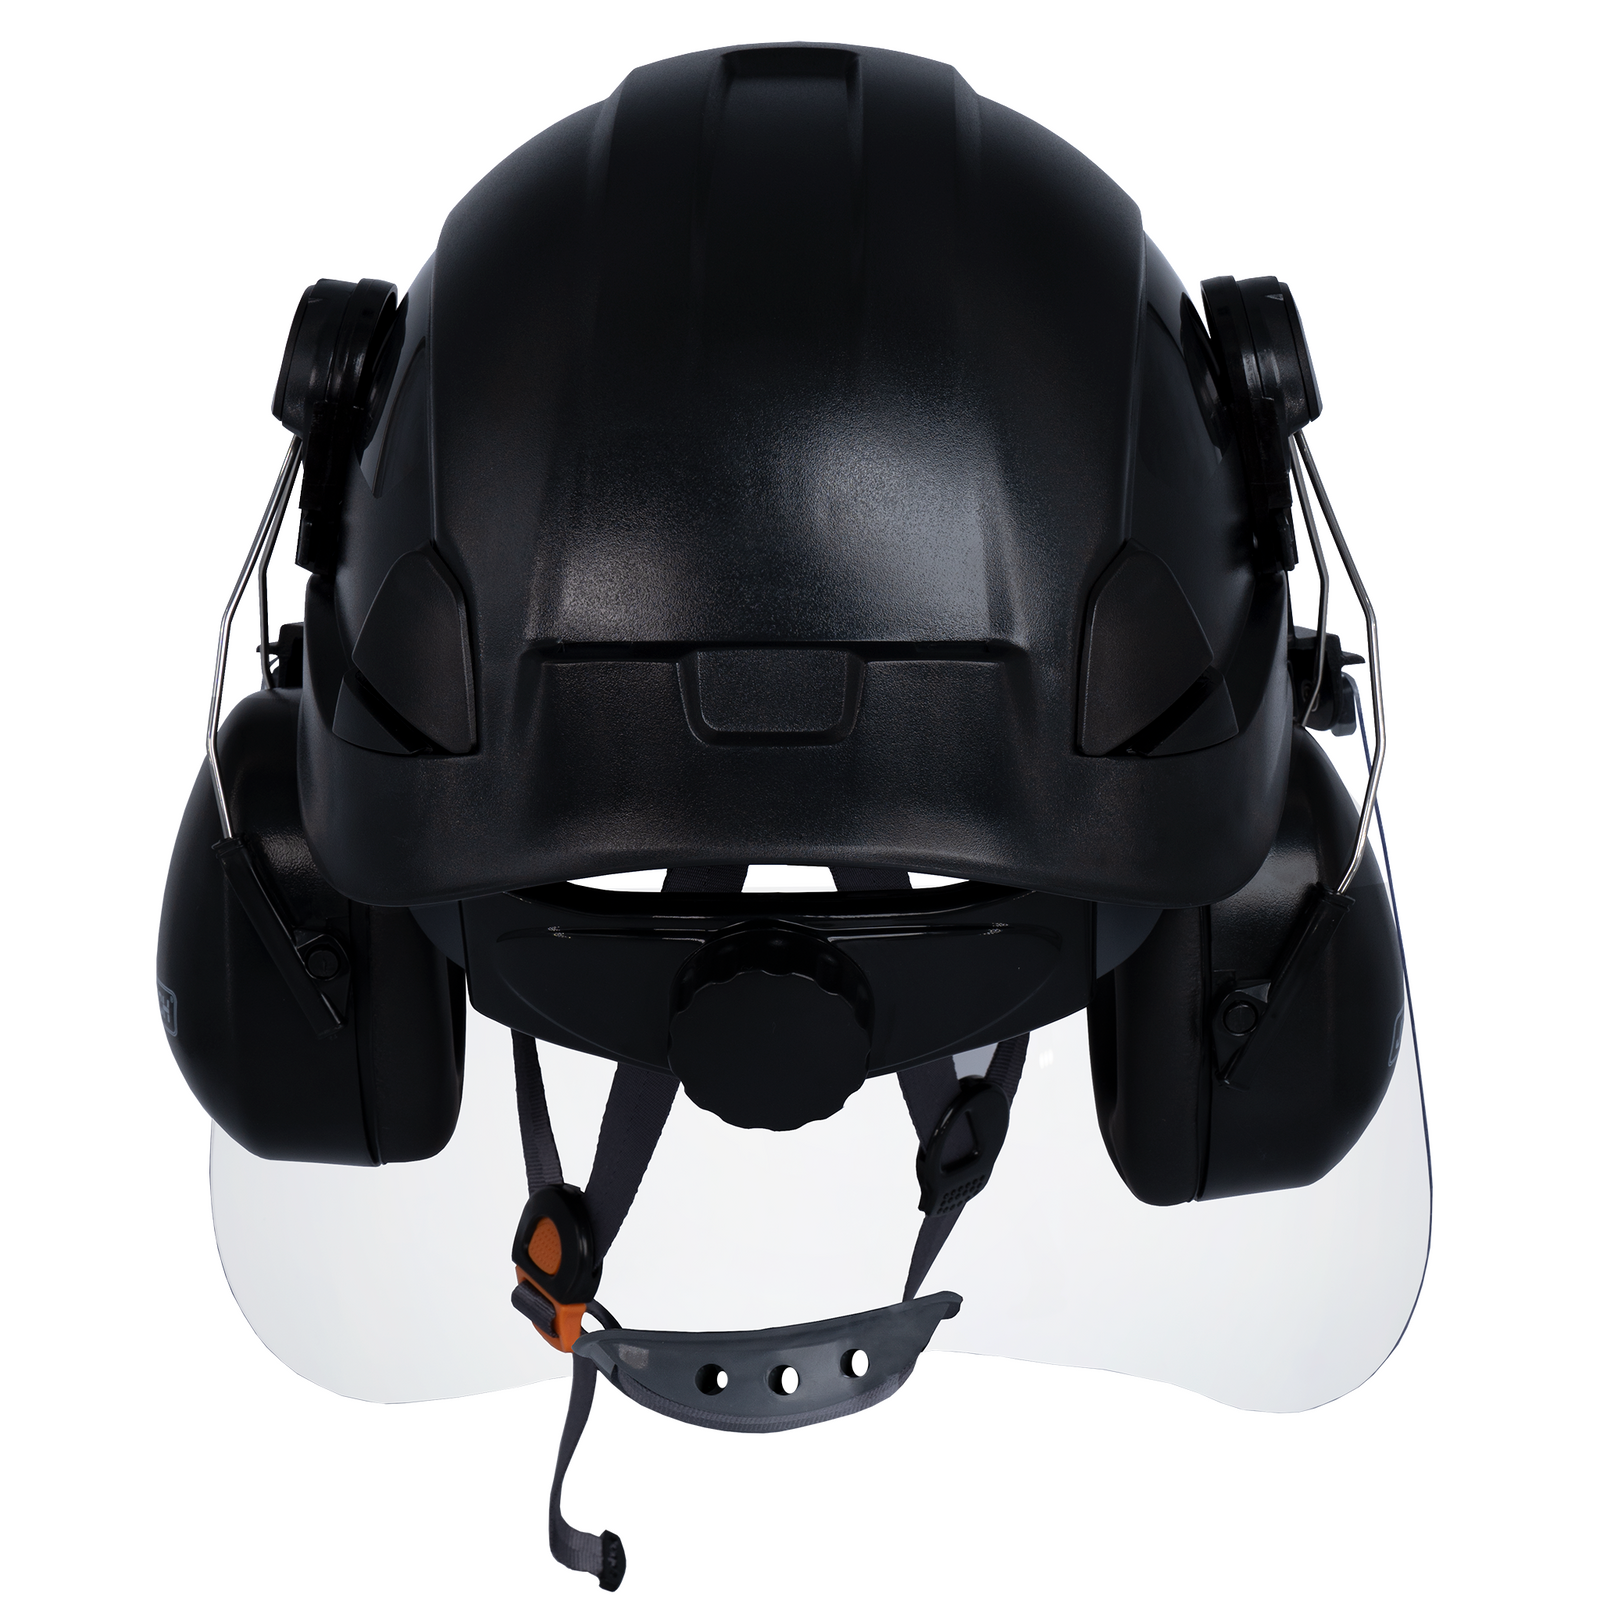 Black 3-in-1 helmet system with mountable face shield and earmuffs